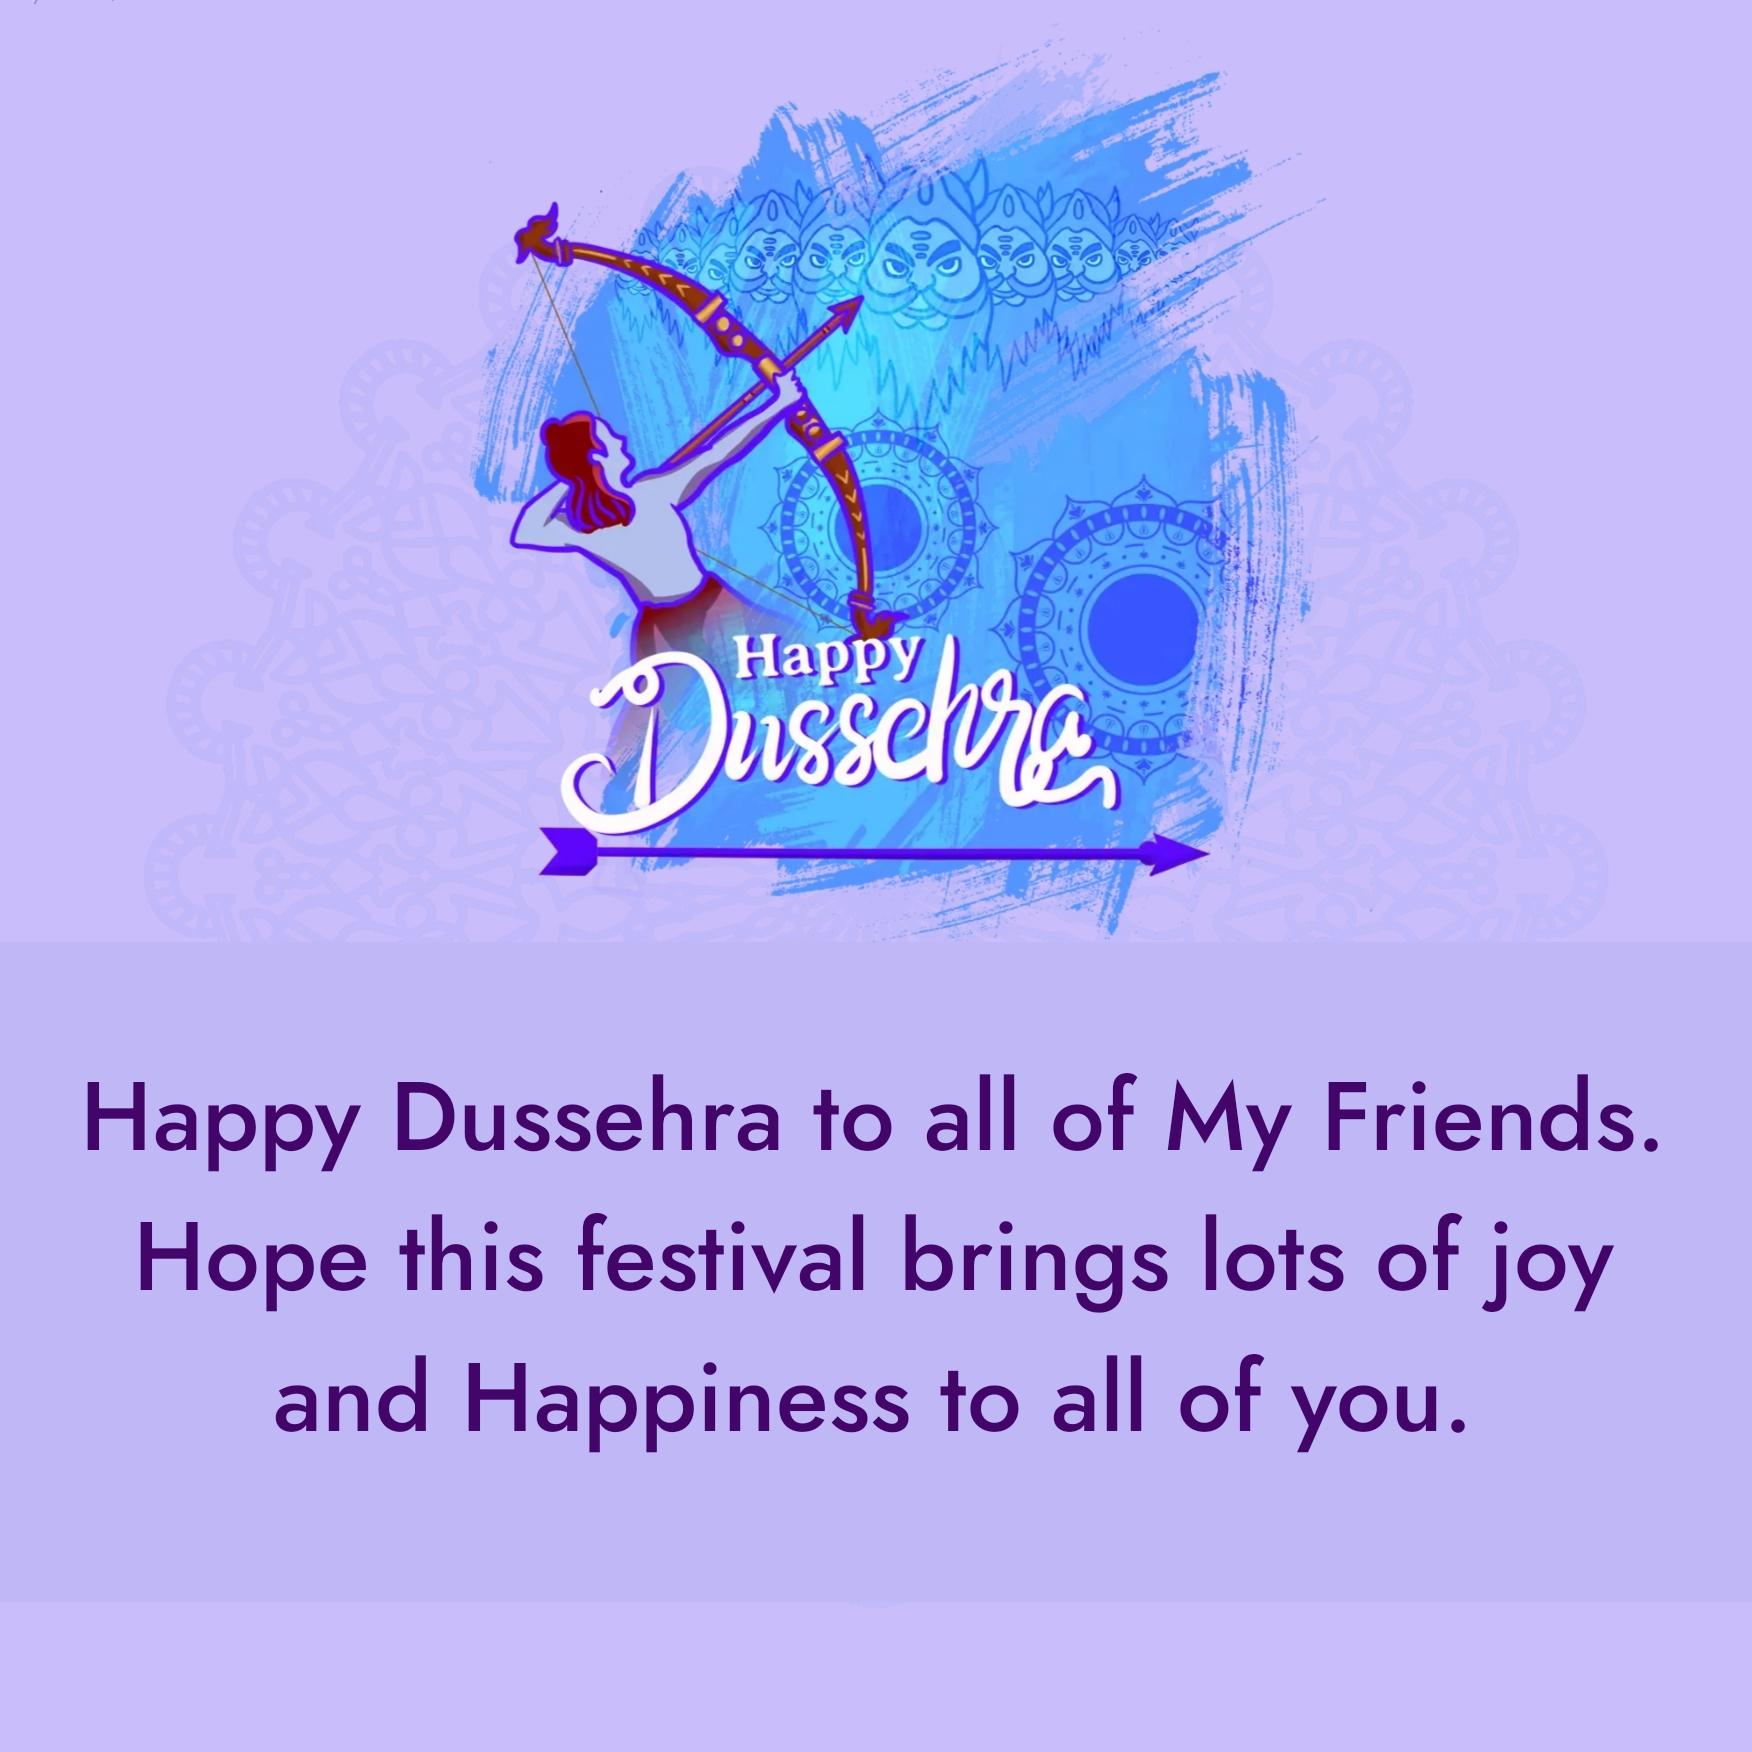 Happy Dussehra to all of My Friends